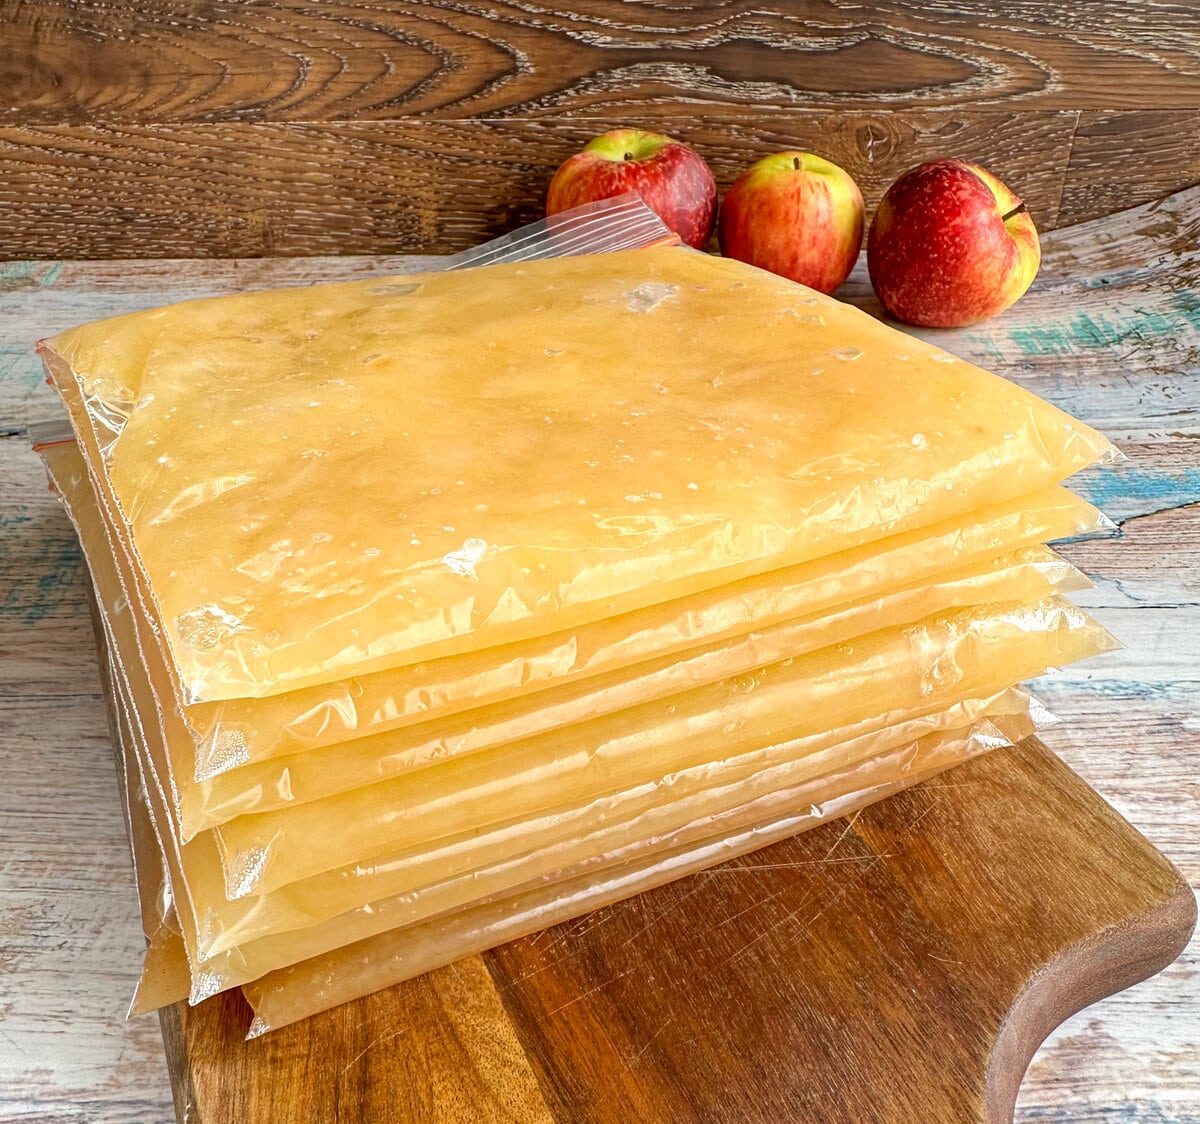 ziplock bags ready for the freezer containing stewed apples or apple compote